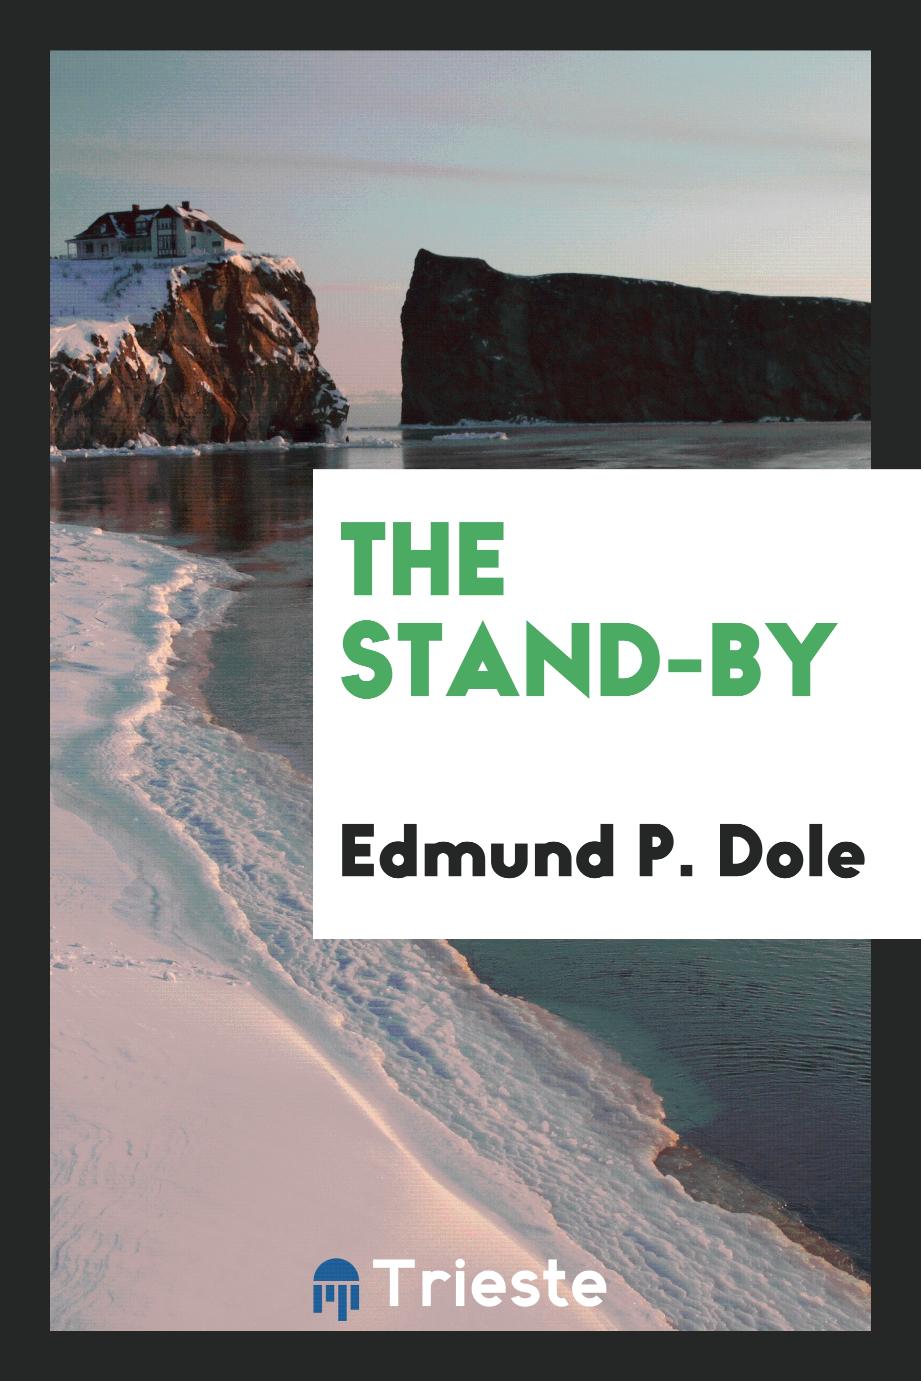 The stand-by